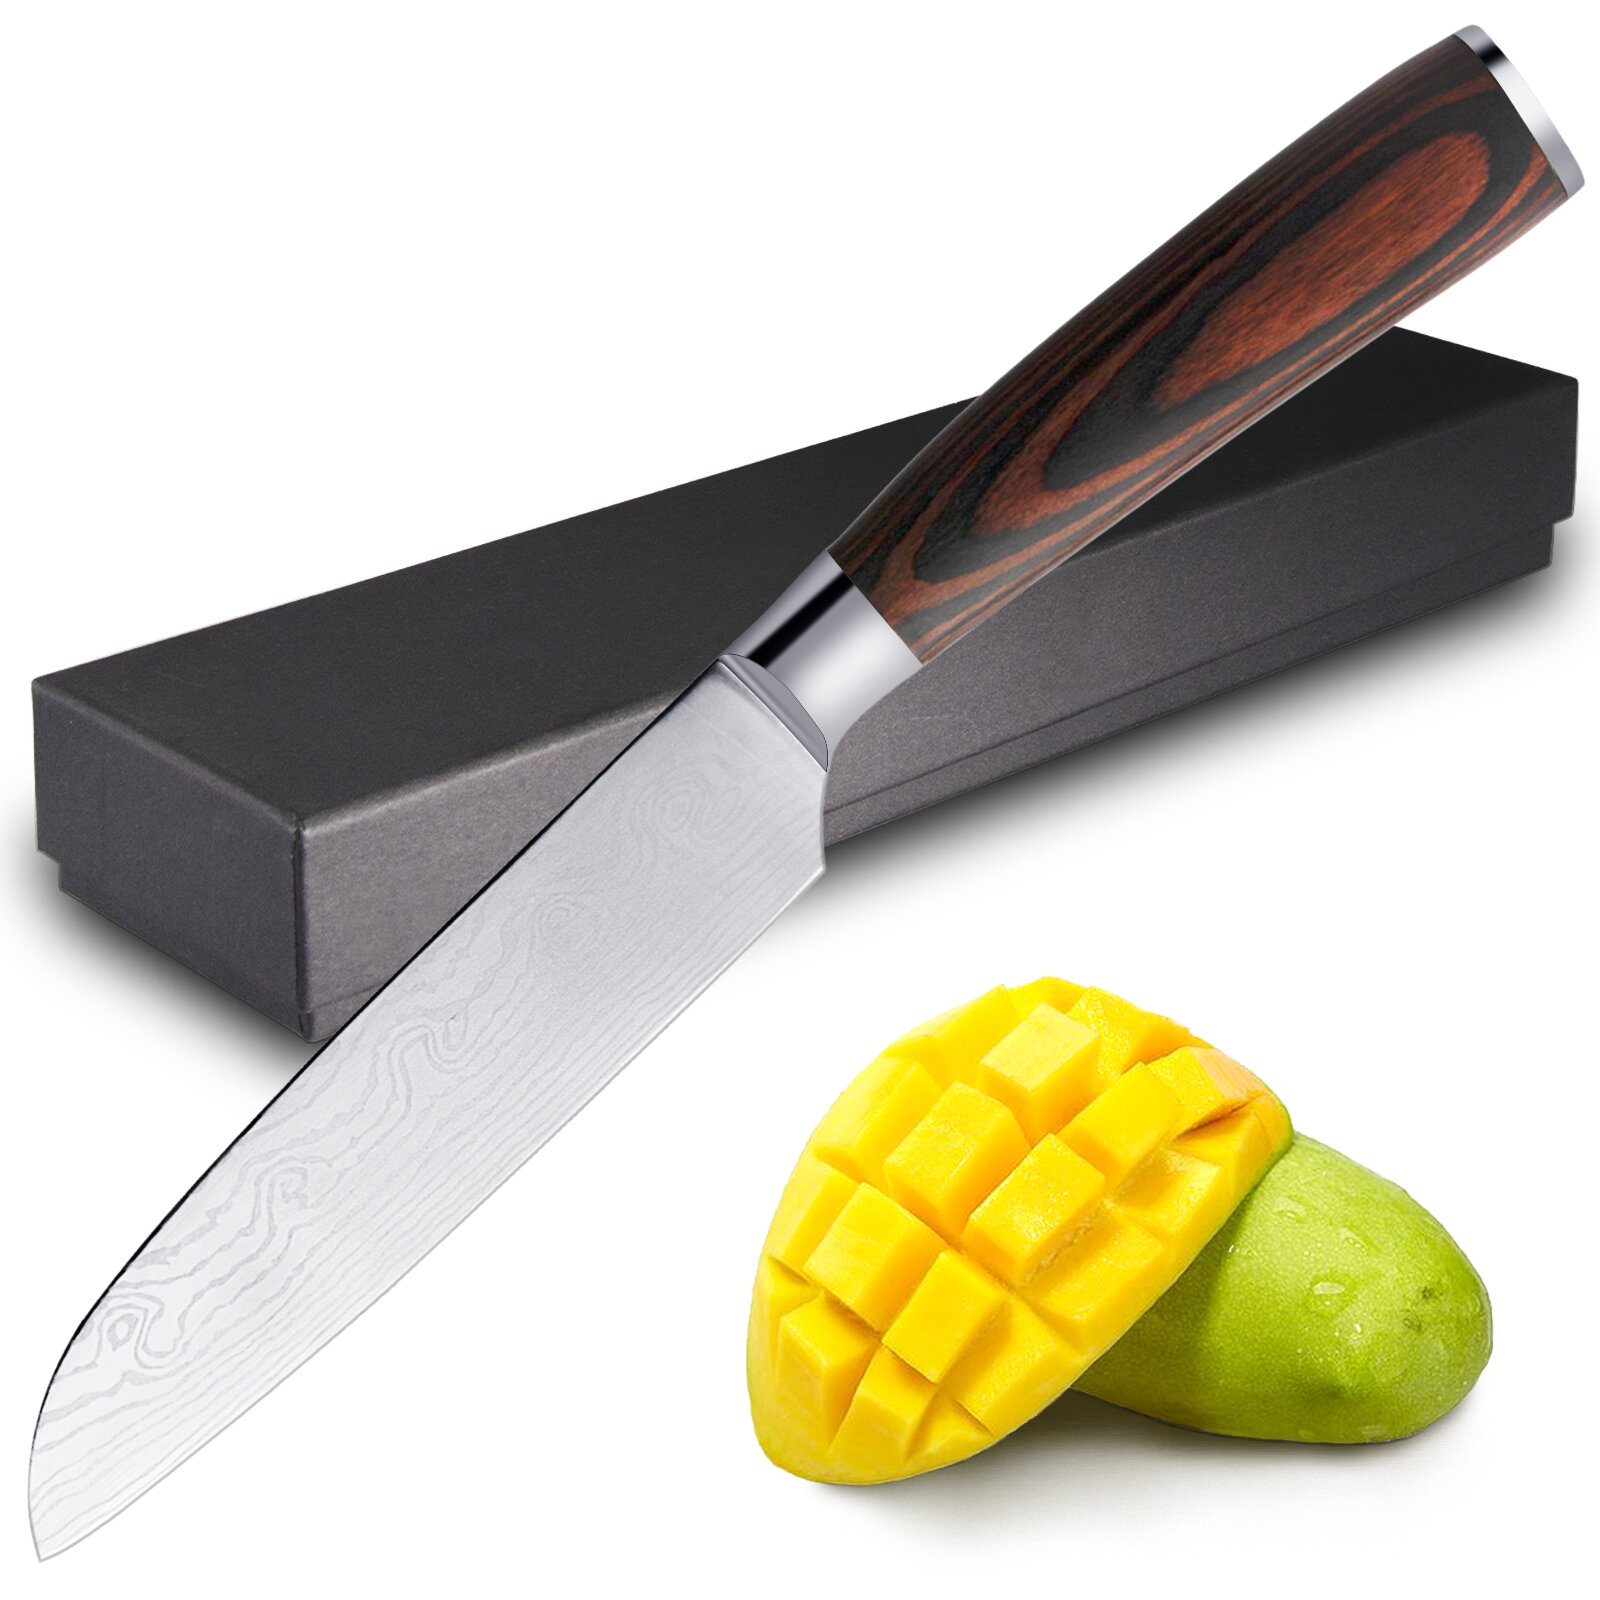 WELLHOME Paring Knife-3.5 Full Tang Utility Knife, Ergonomic Handle, Fruit and Vegetable Cutting Chopping Carving Knives - with Gift Box XF009F